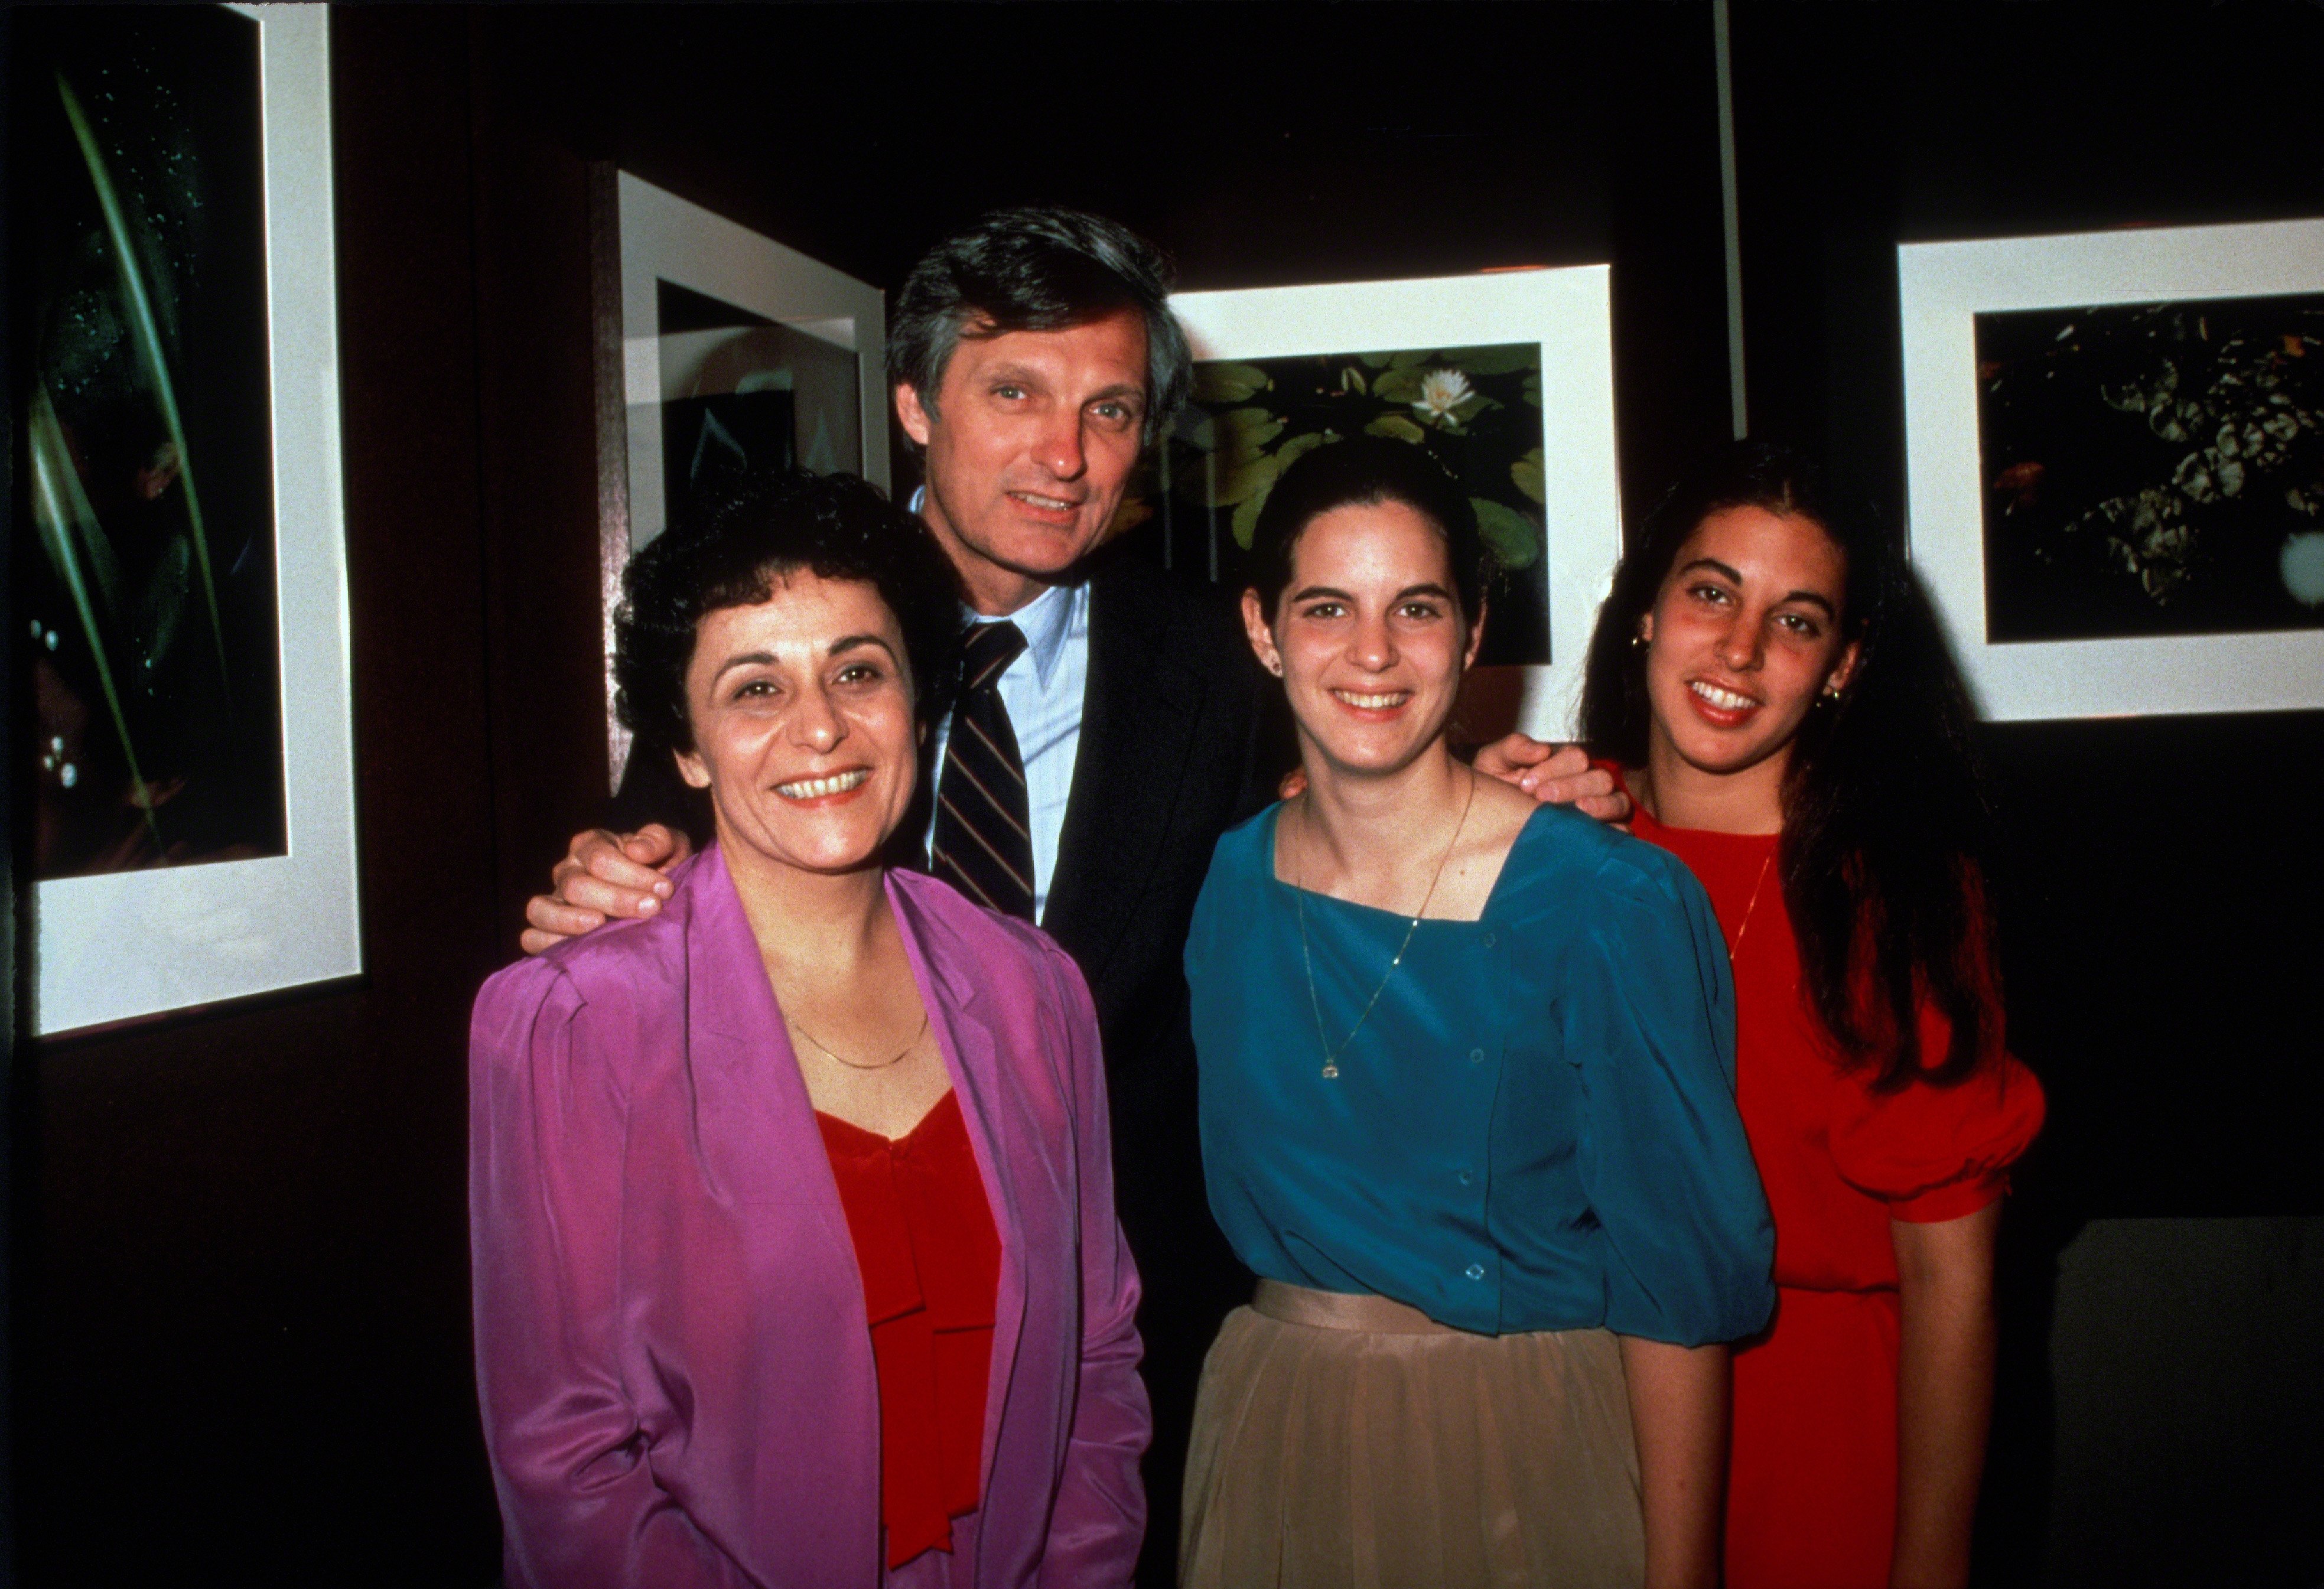 Alan and Arlene Alda with their daughters circa 1981 in New York City | Source: Getty Images